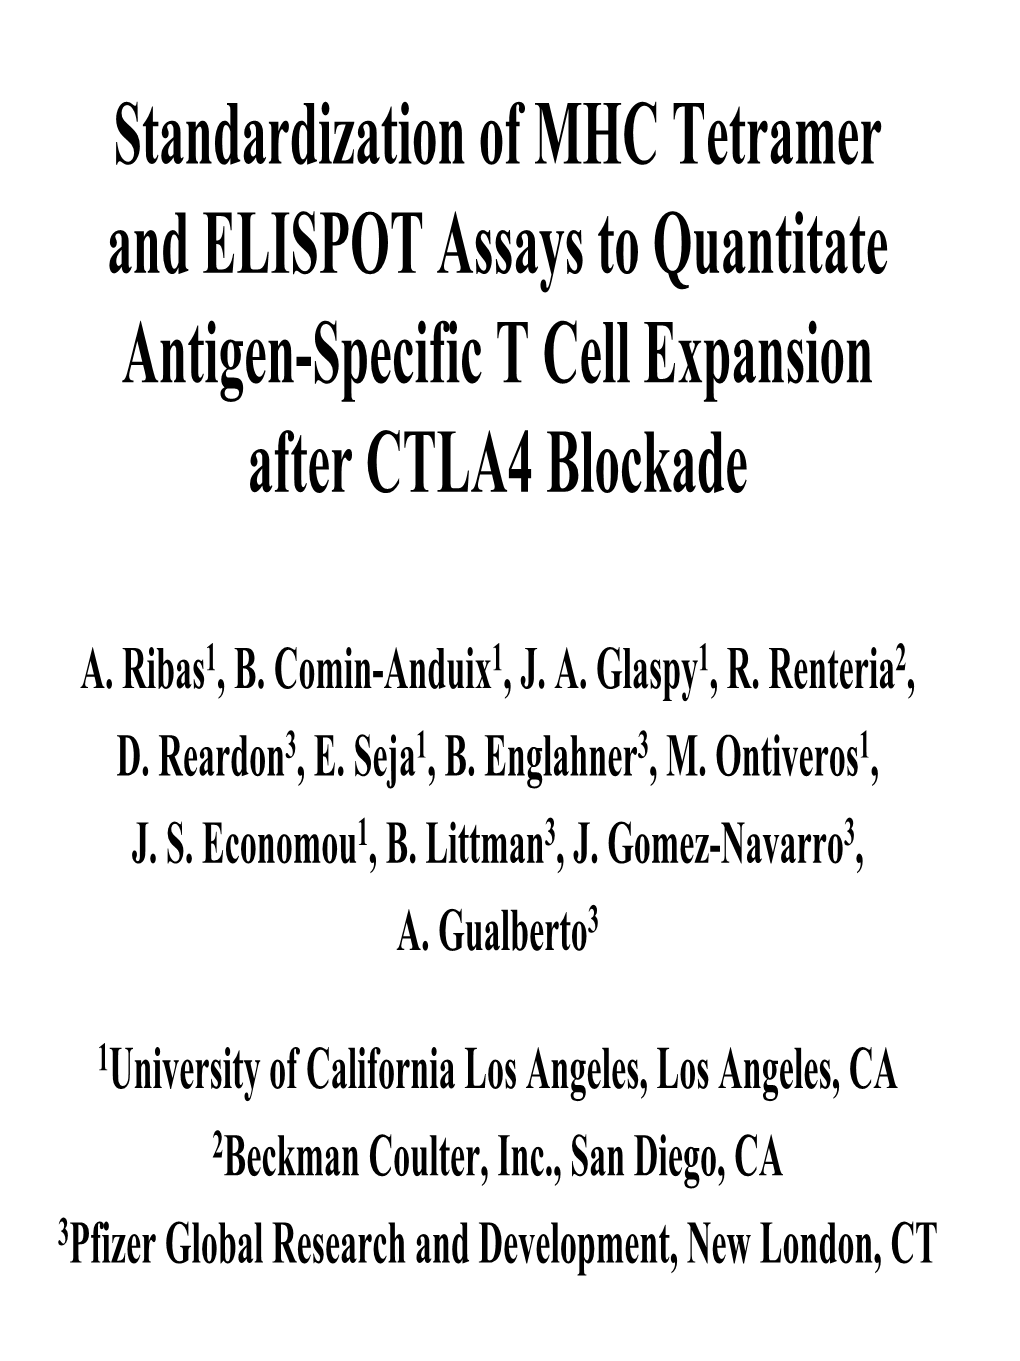 Standardization of MHC Tetramer and ELISPOT Assays to Quantitate Antigen-Specific T Cell Expansion After CTLA4 Blockade